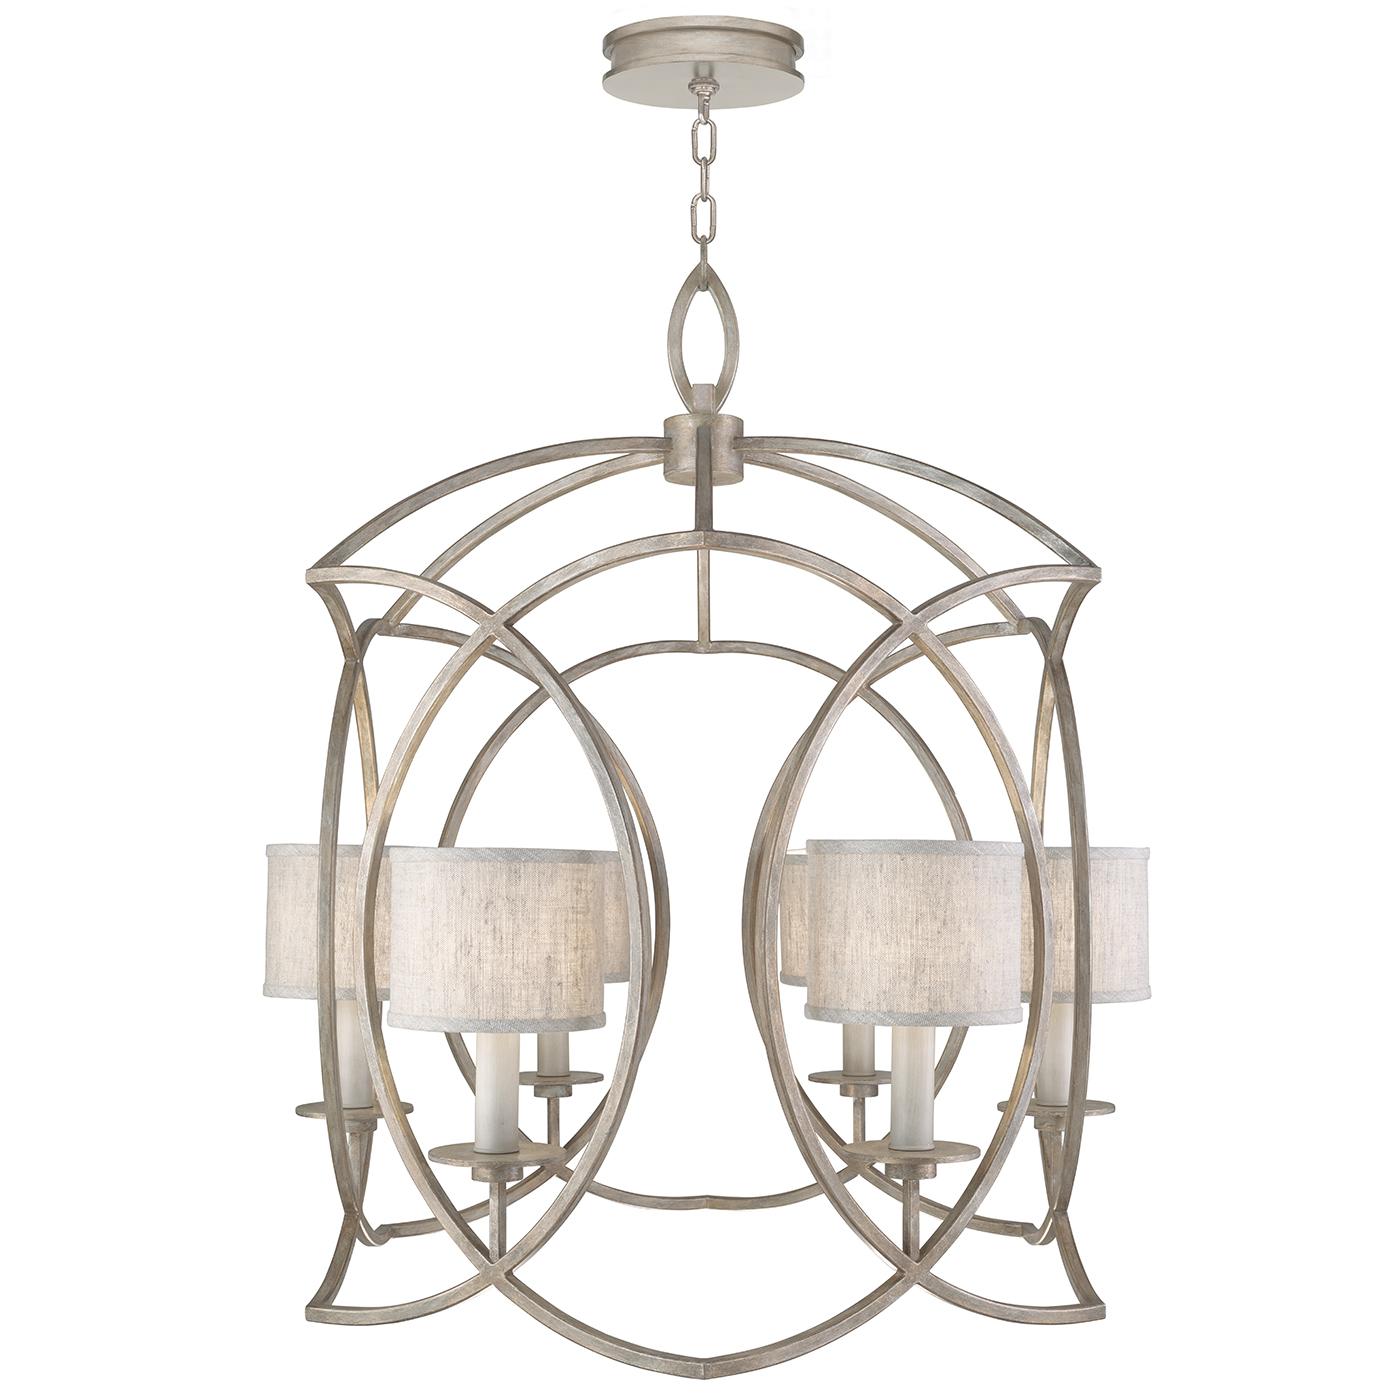 Product Cienfuegos 30.5" Round Chandelier image